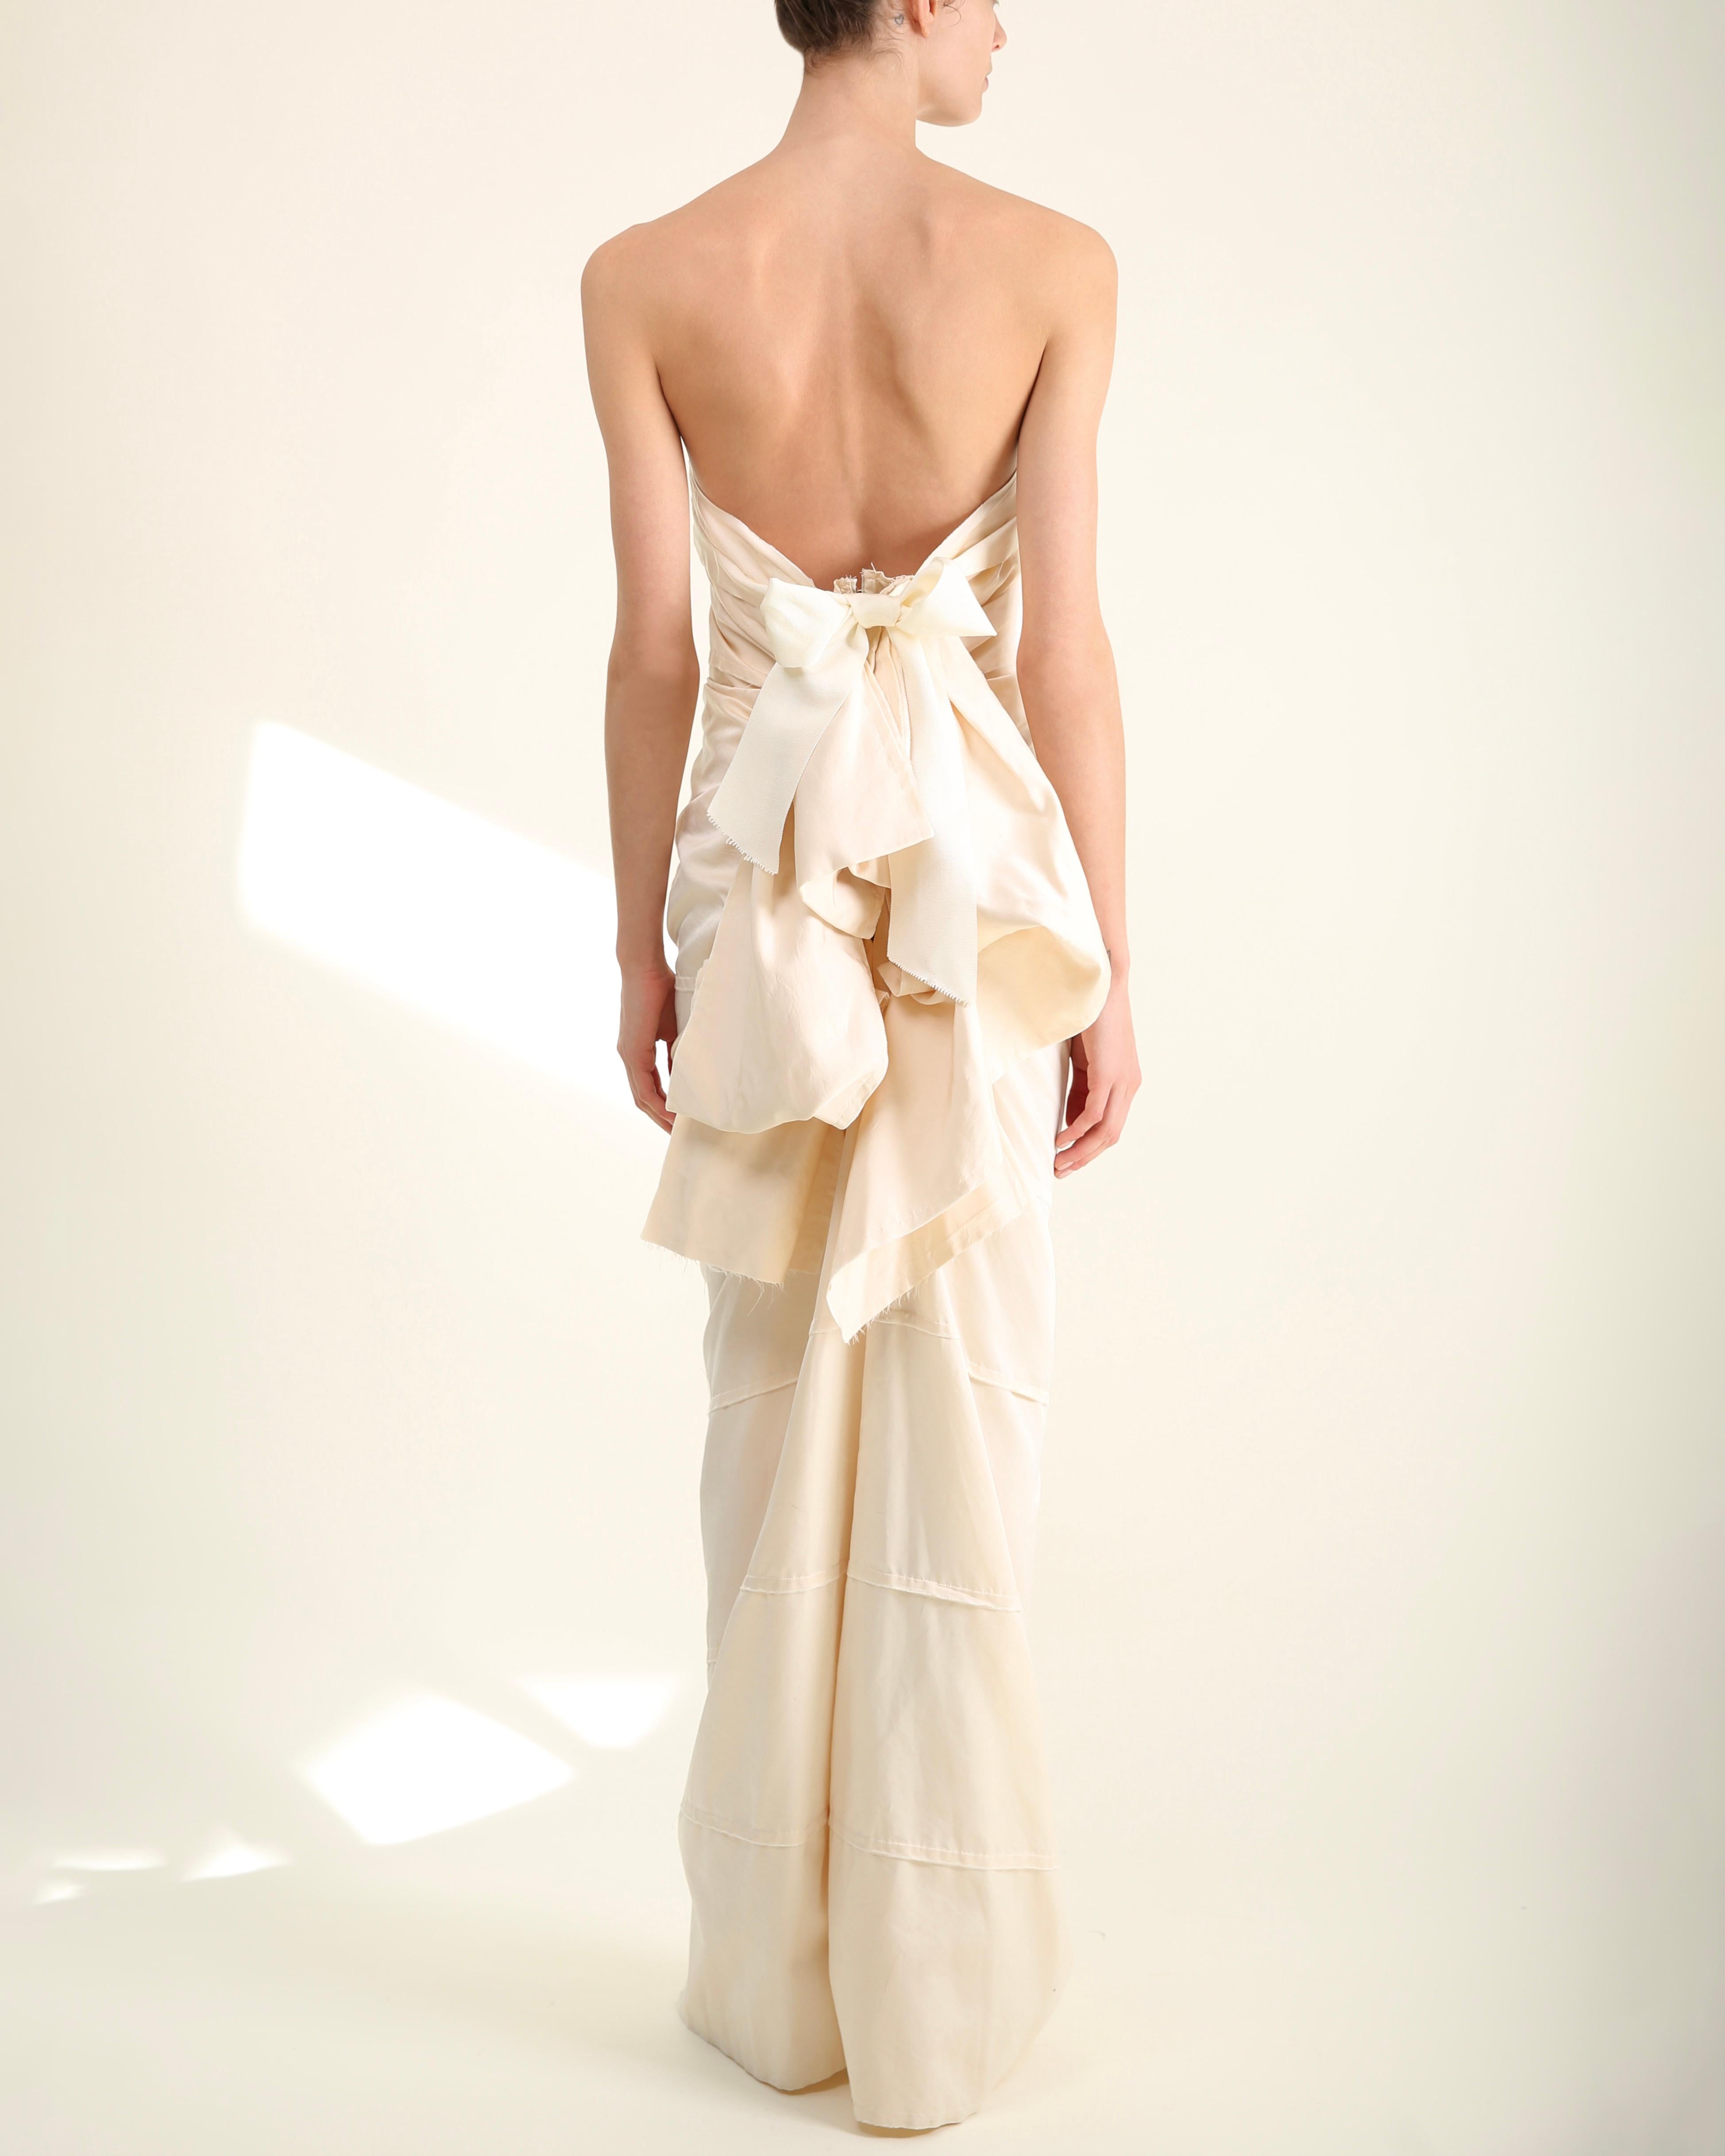 Lanvin Blanche 2013 strapless silk ruffled ivory bow back wedding dress gown F42 For Sale 6